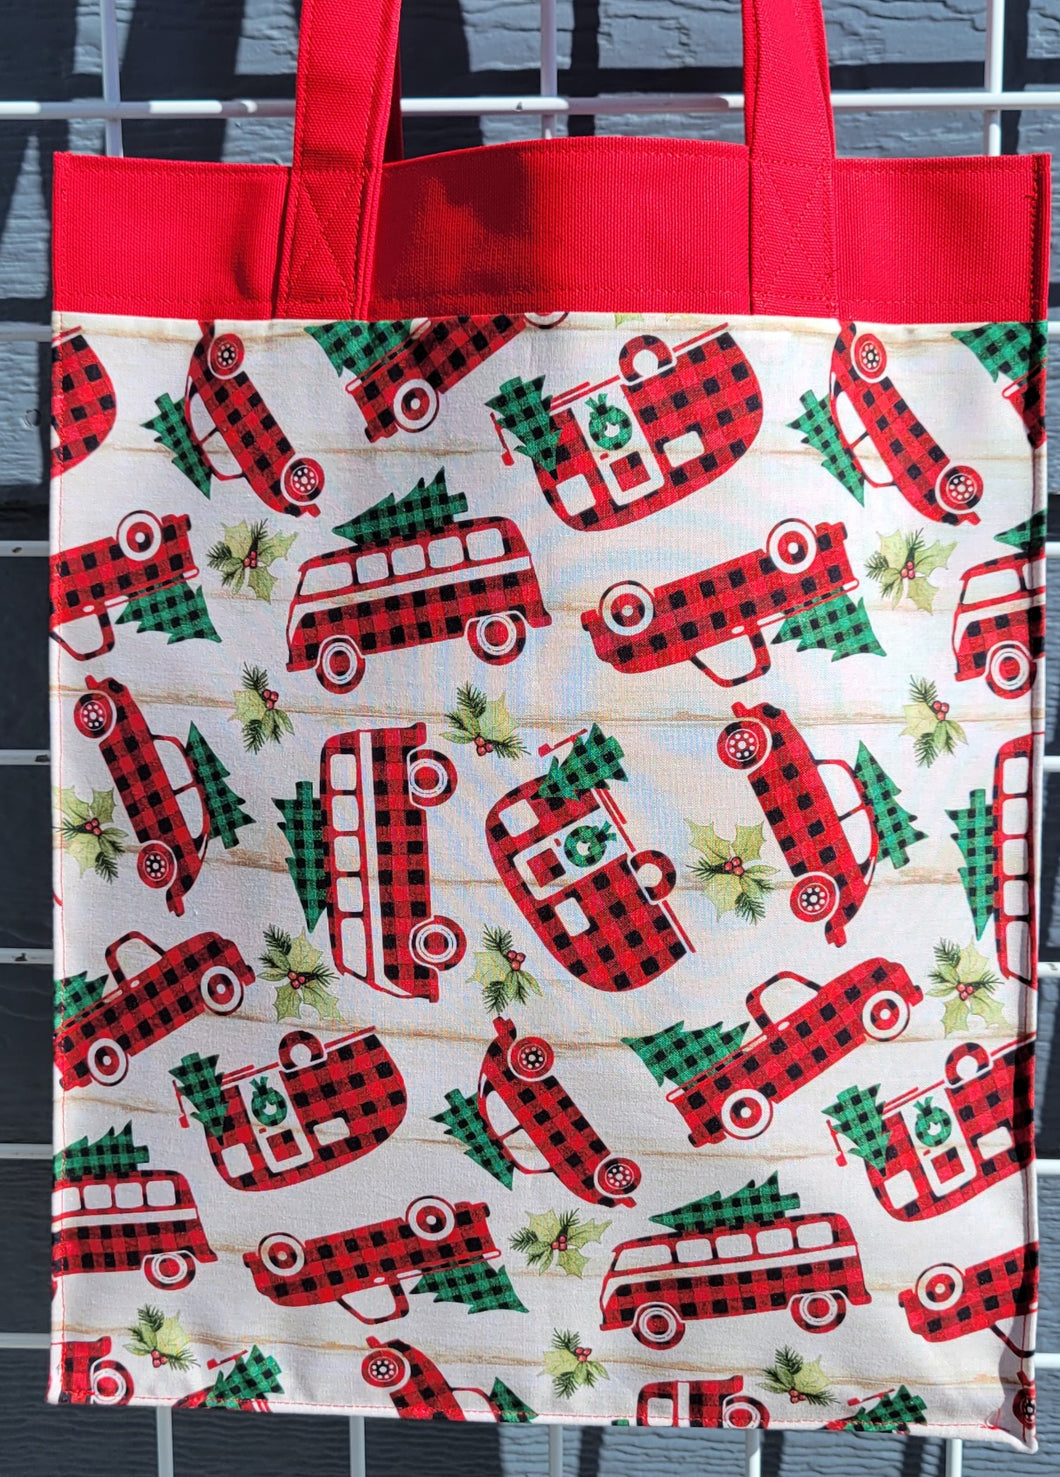 Large Market Tote with Pocket - Plaid Christmas Cars